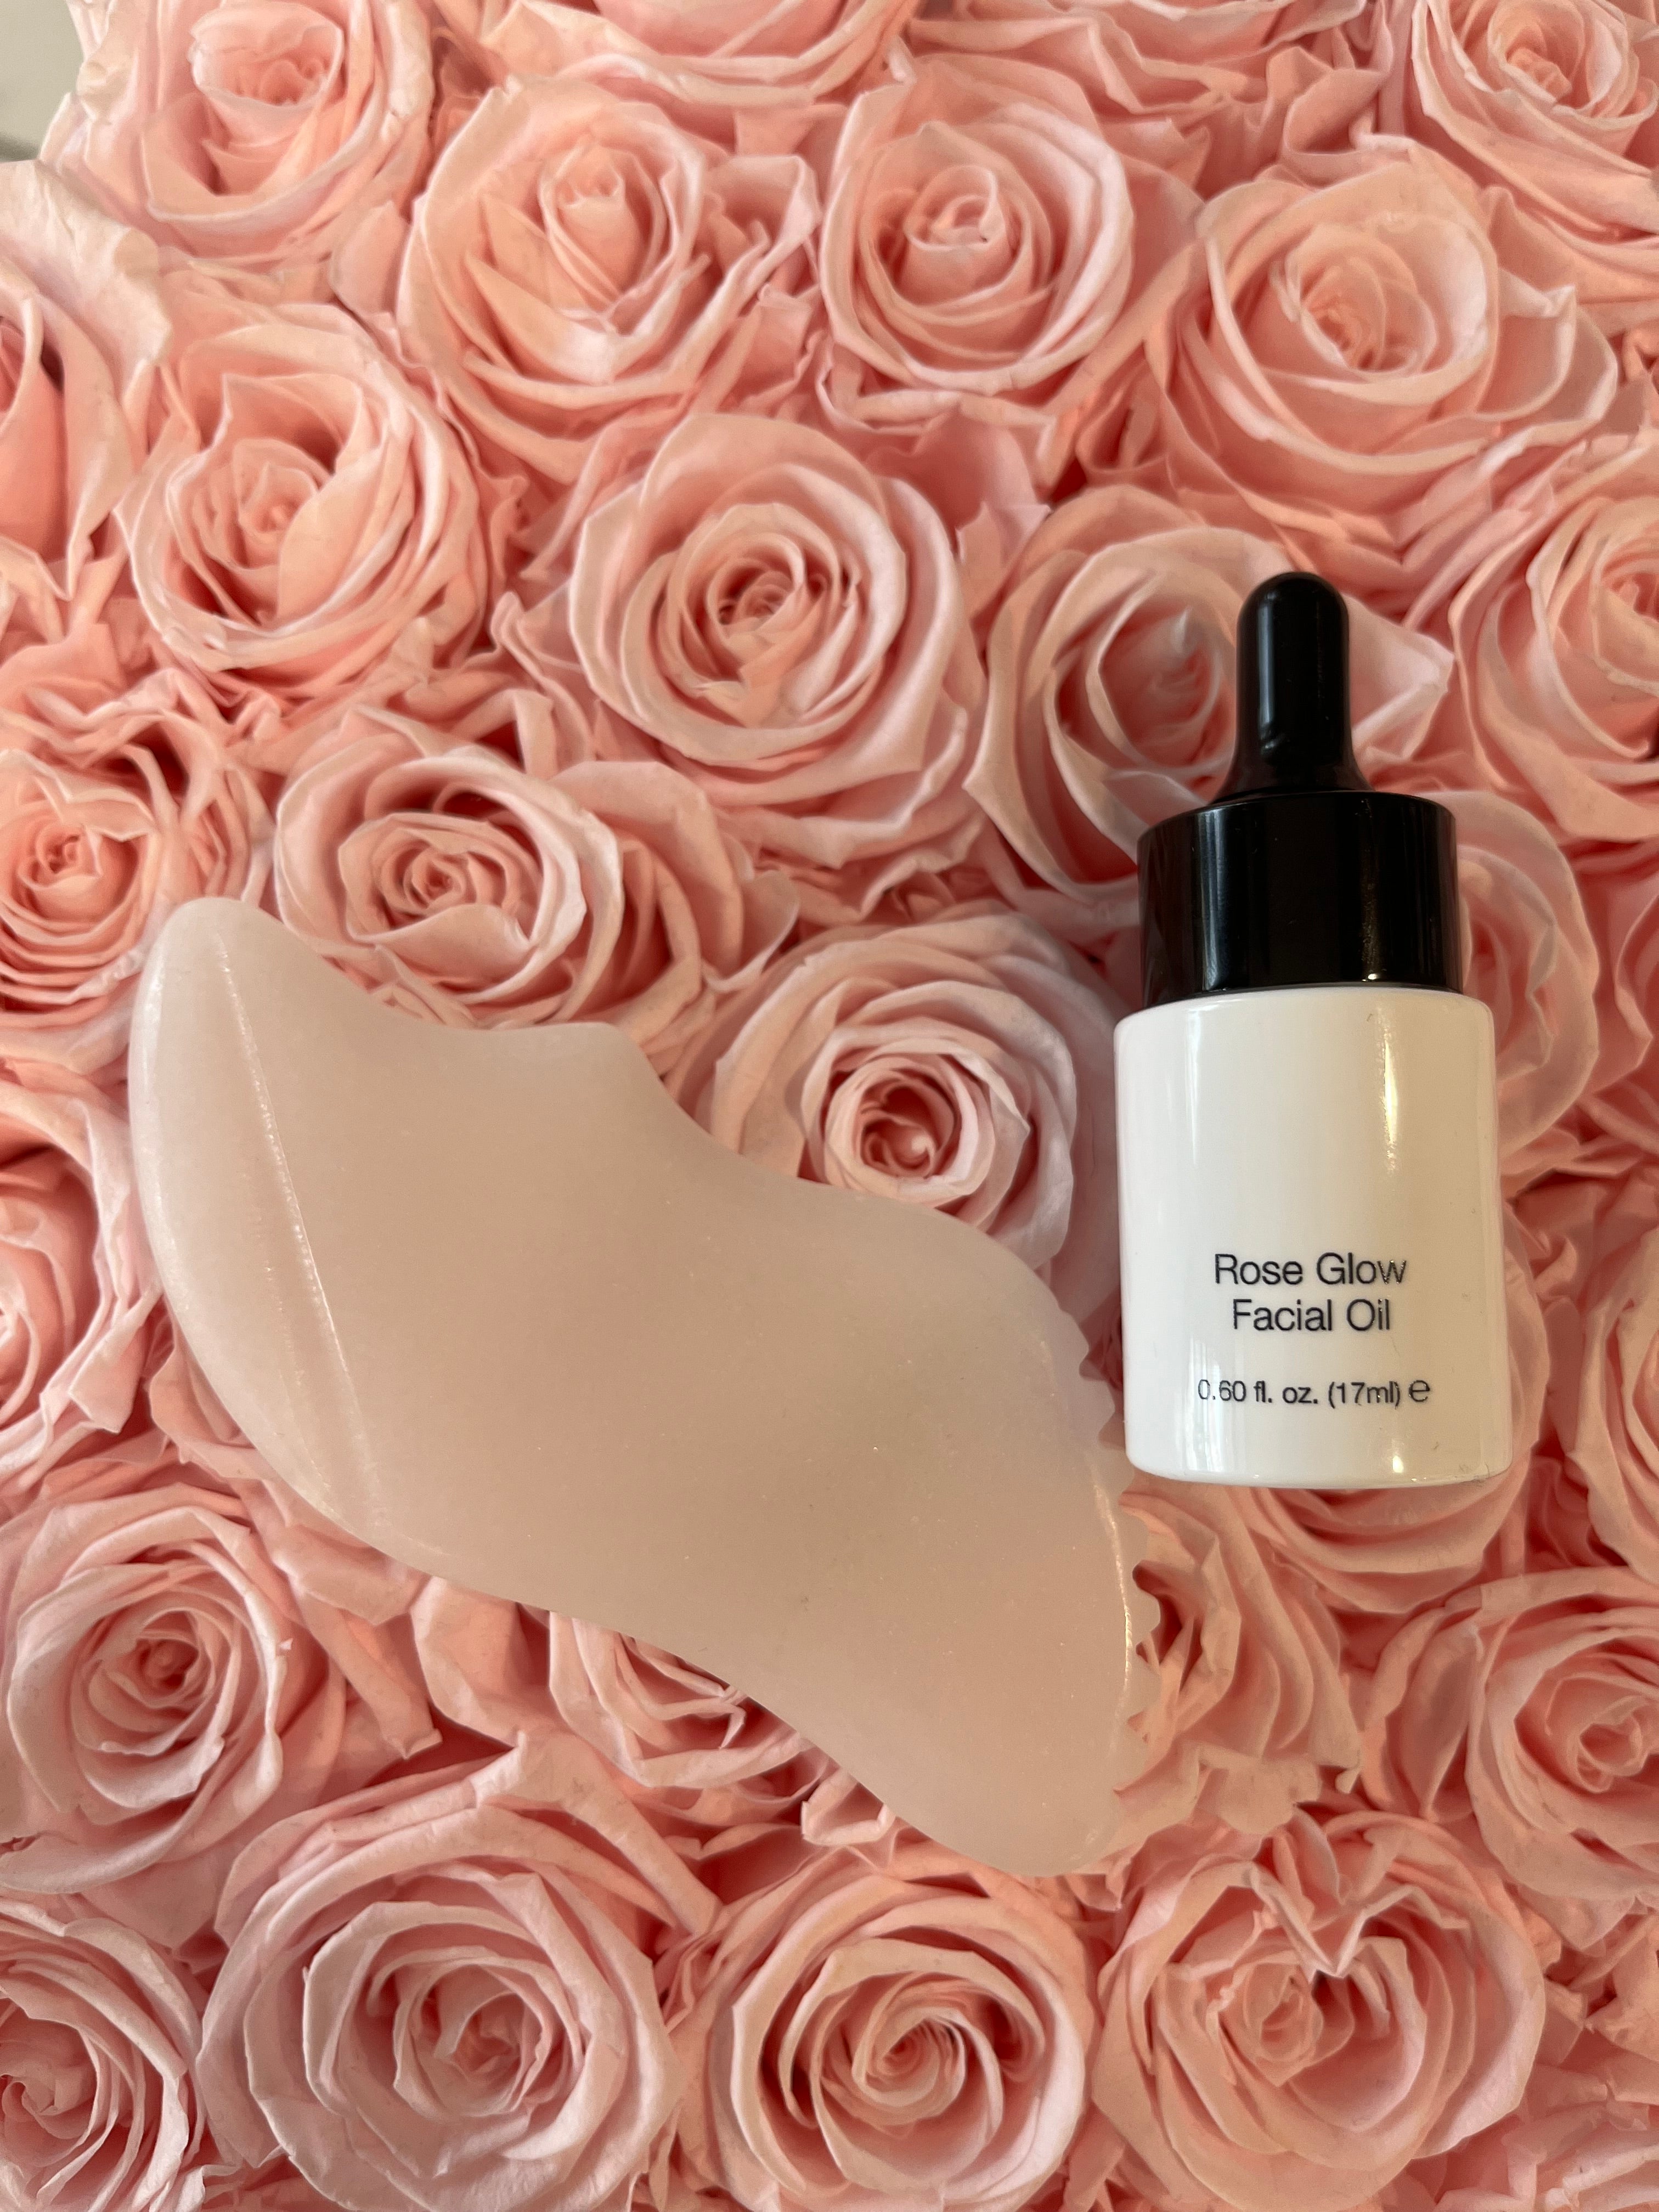 GUA SHA with Rose Glow Facial Oil